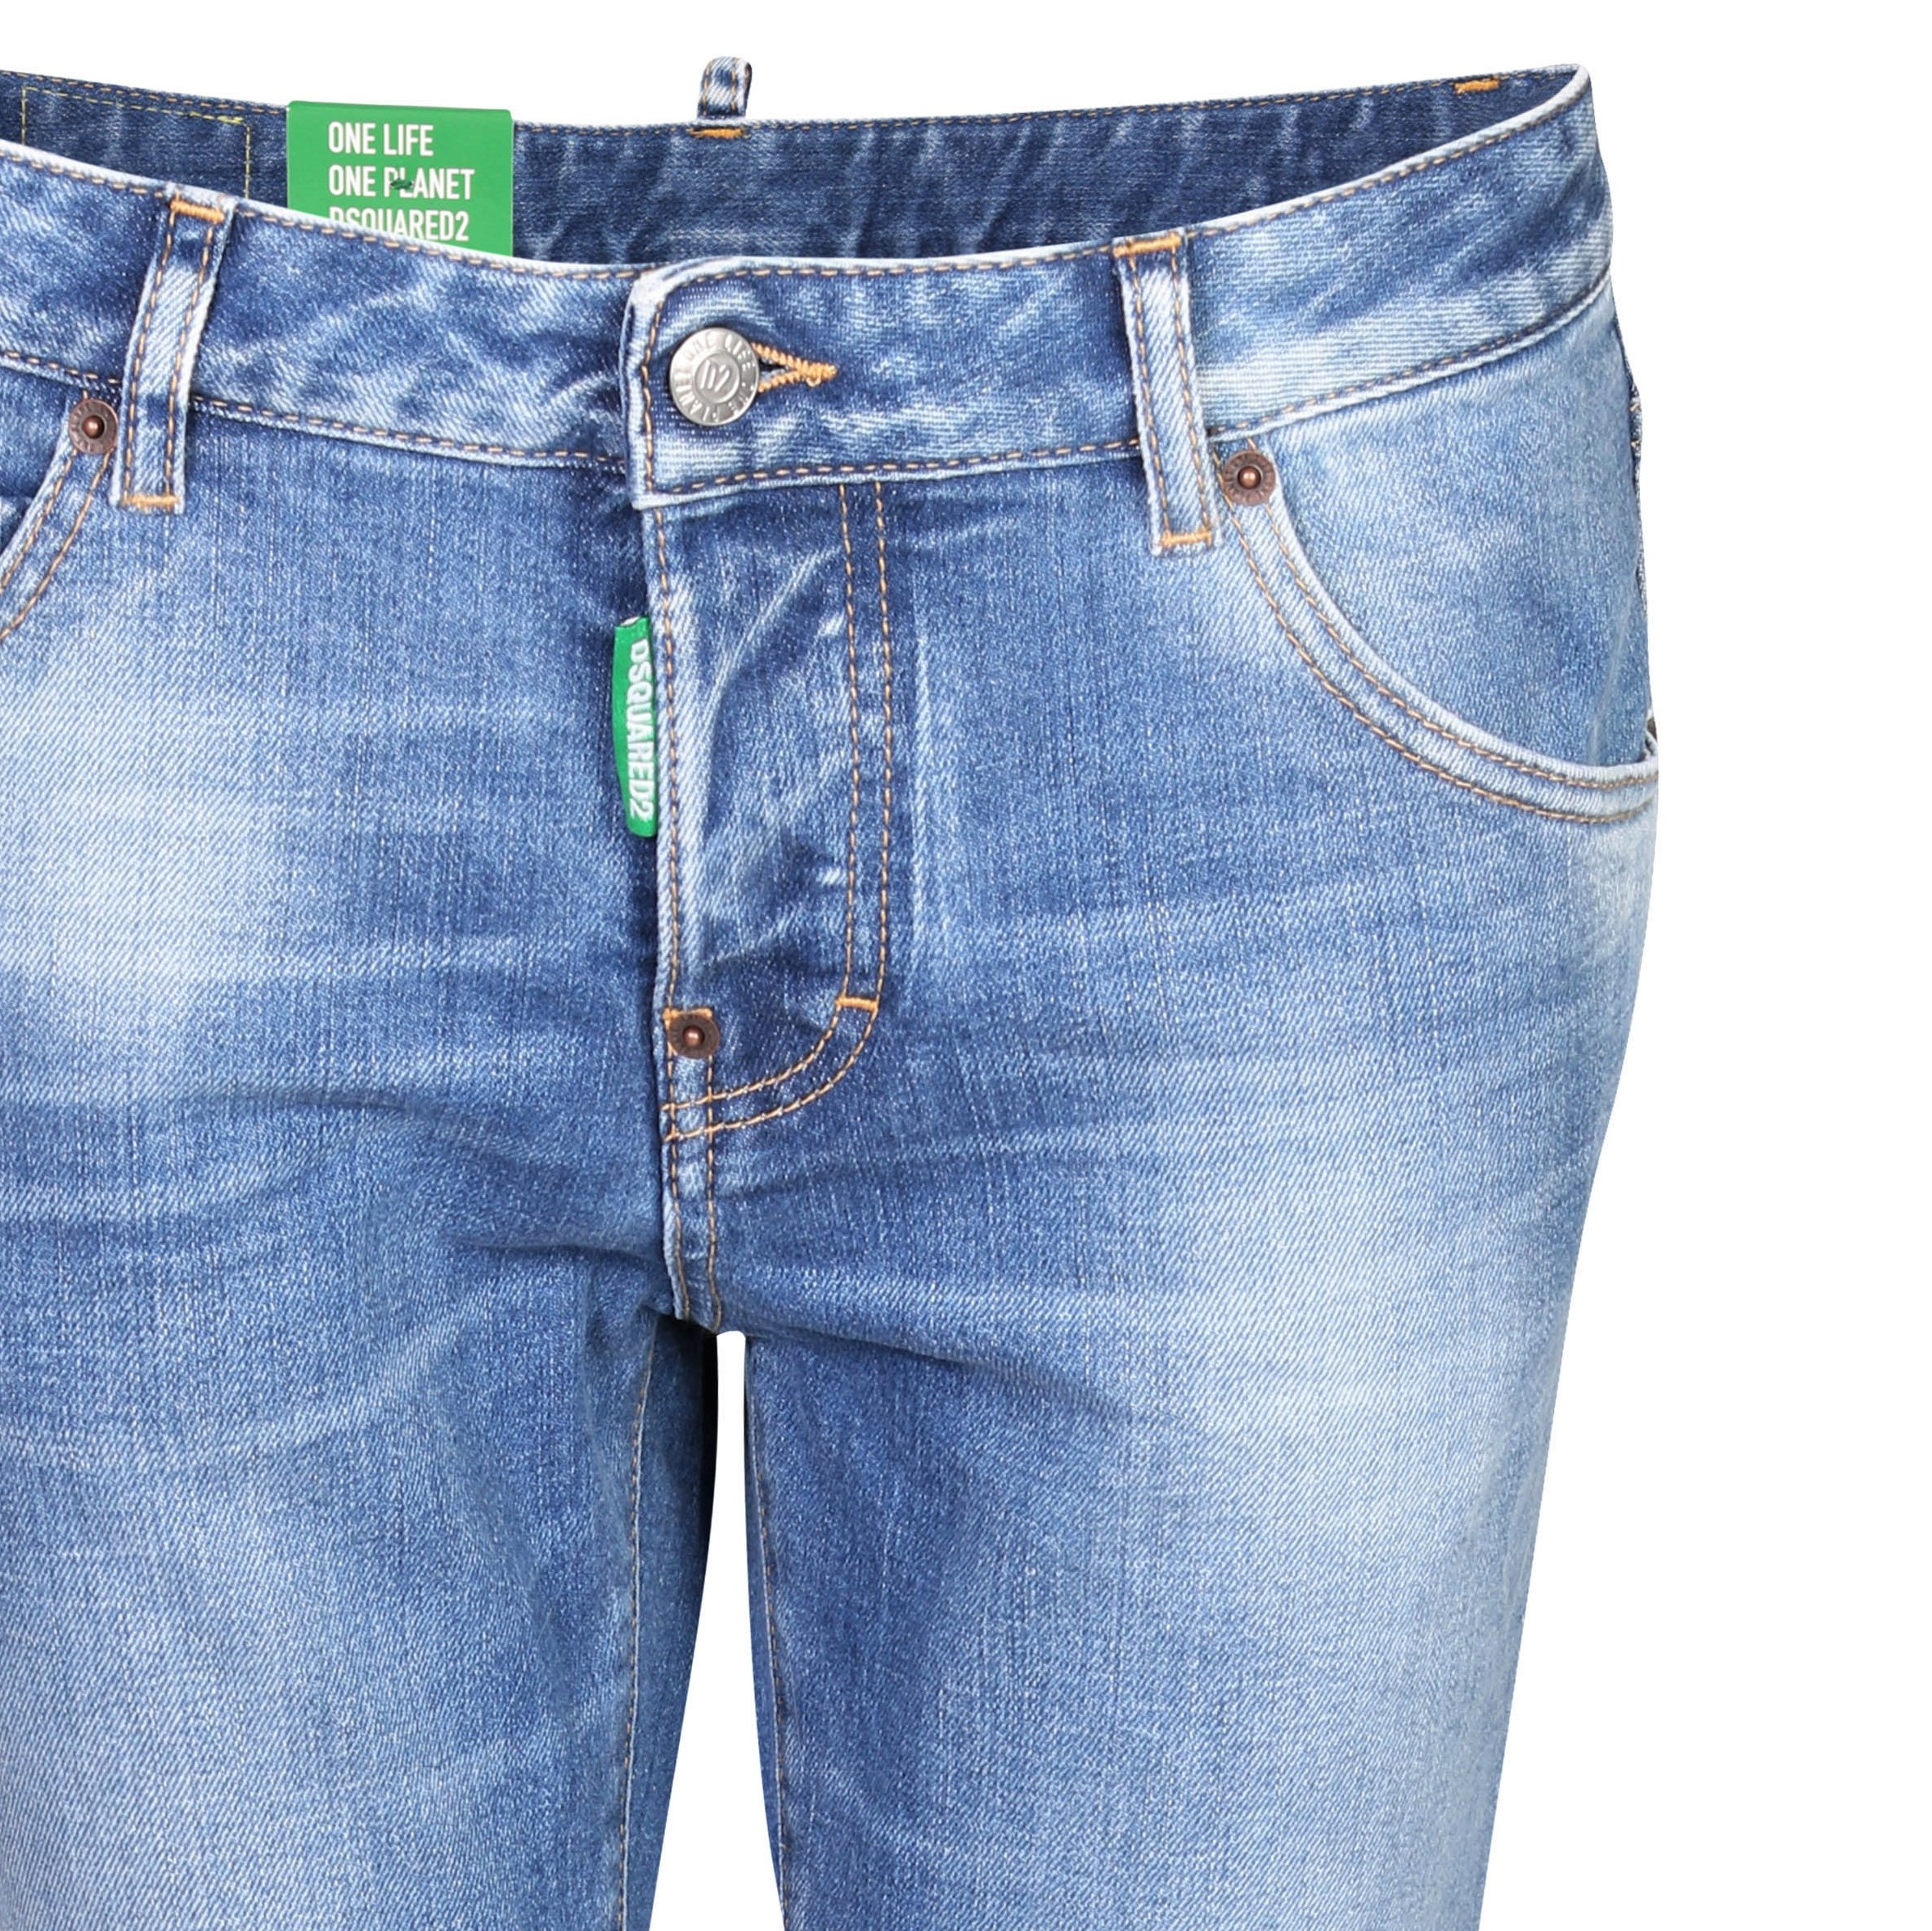 DSQUARED2 Green Label Cool Girl Jeans in Washed Light Blue